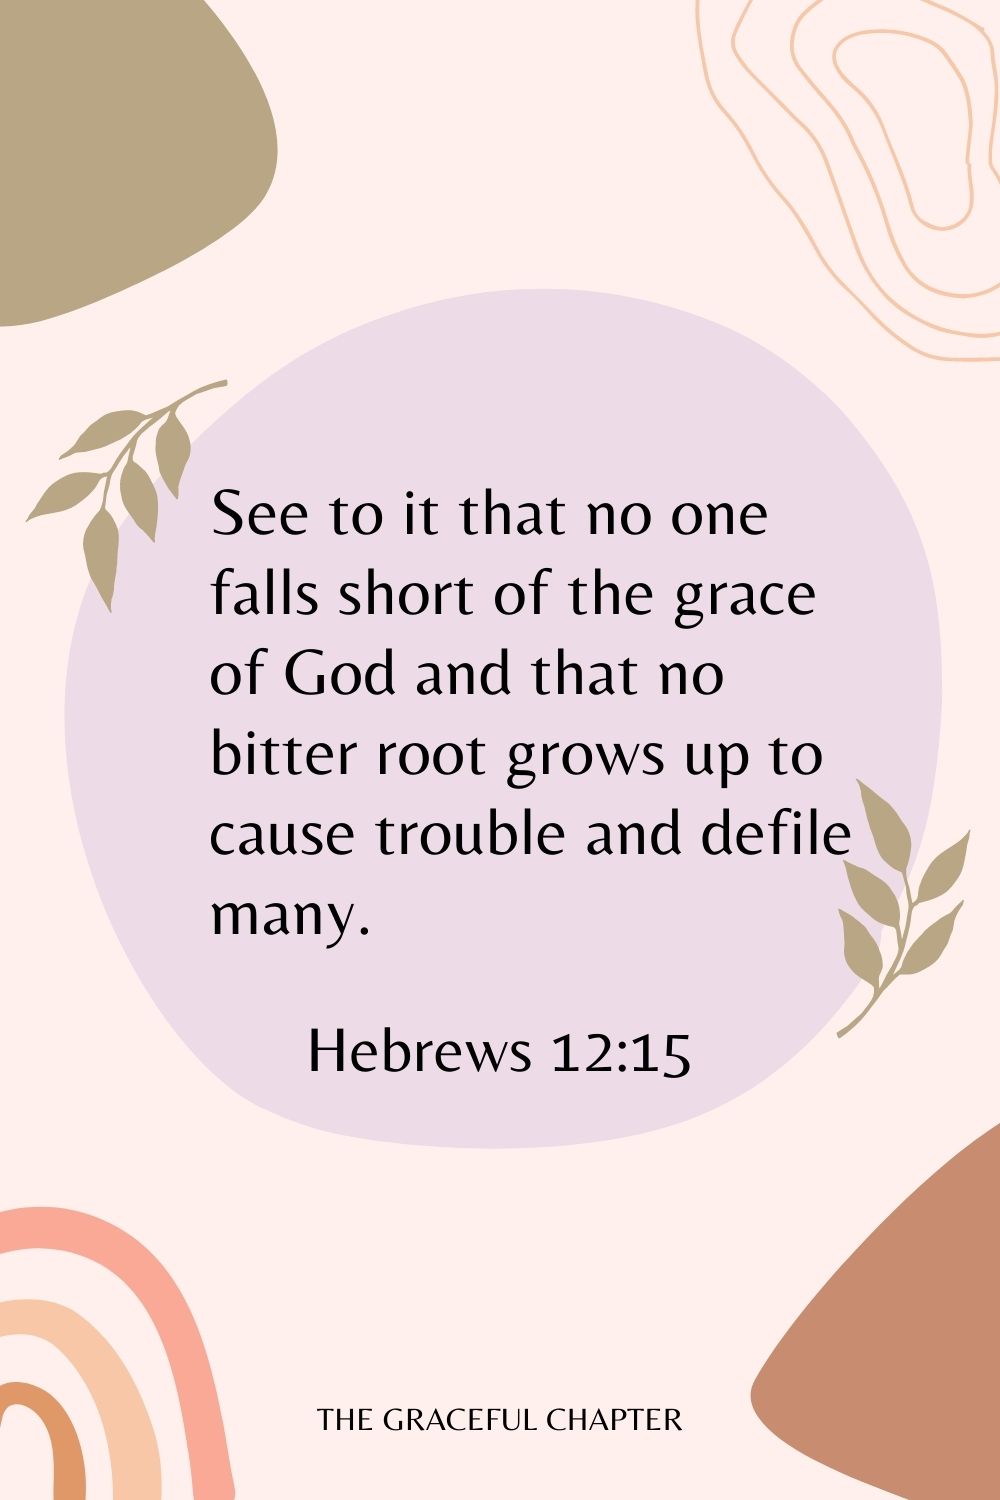 See to it that no one falls short of the grace of God and that no bitter root grows up to cause trouble and defile many. Hebrews 12:15